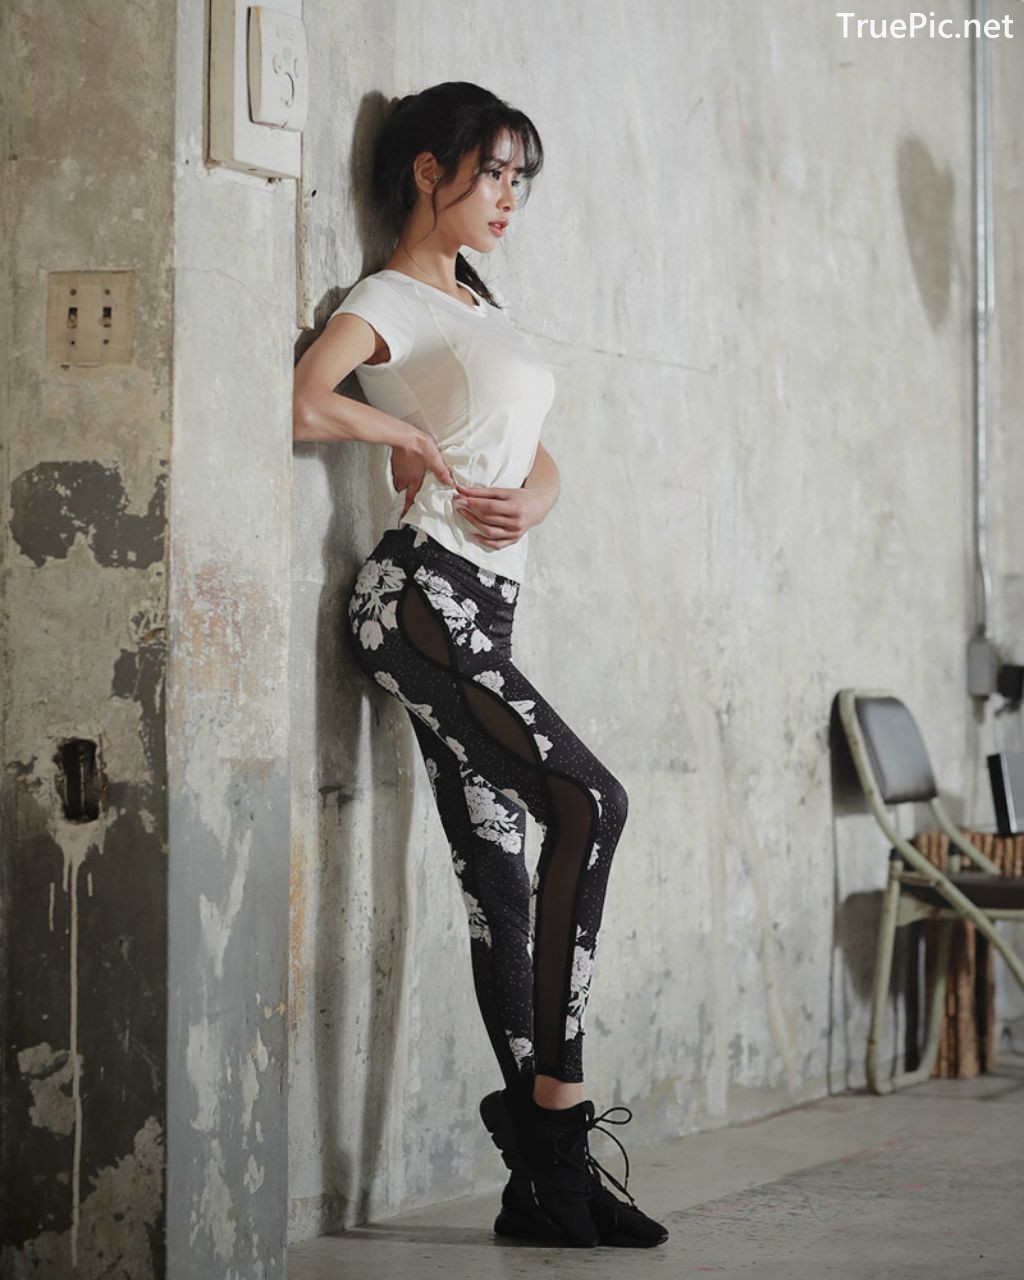 Image-Korean-Fashion-Model-Ju-Woo-Fitness-Set-Collection-TruePic.net- Picture-142